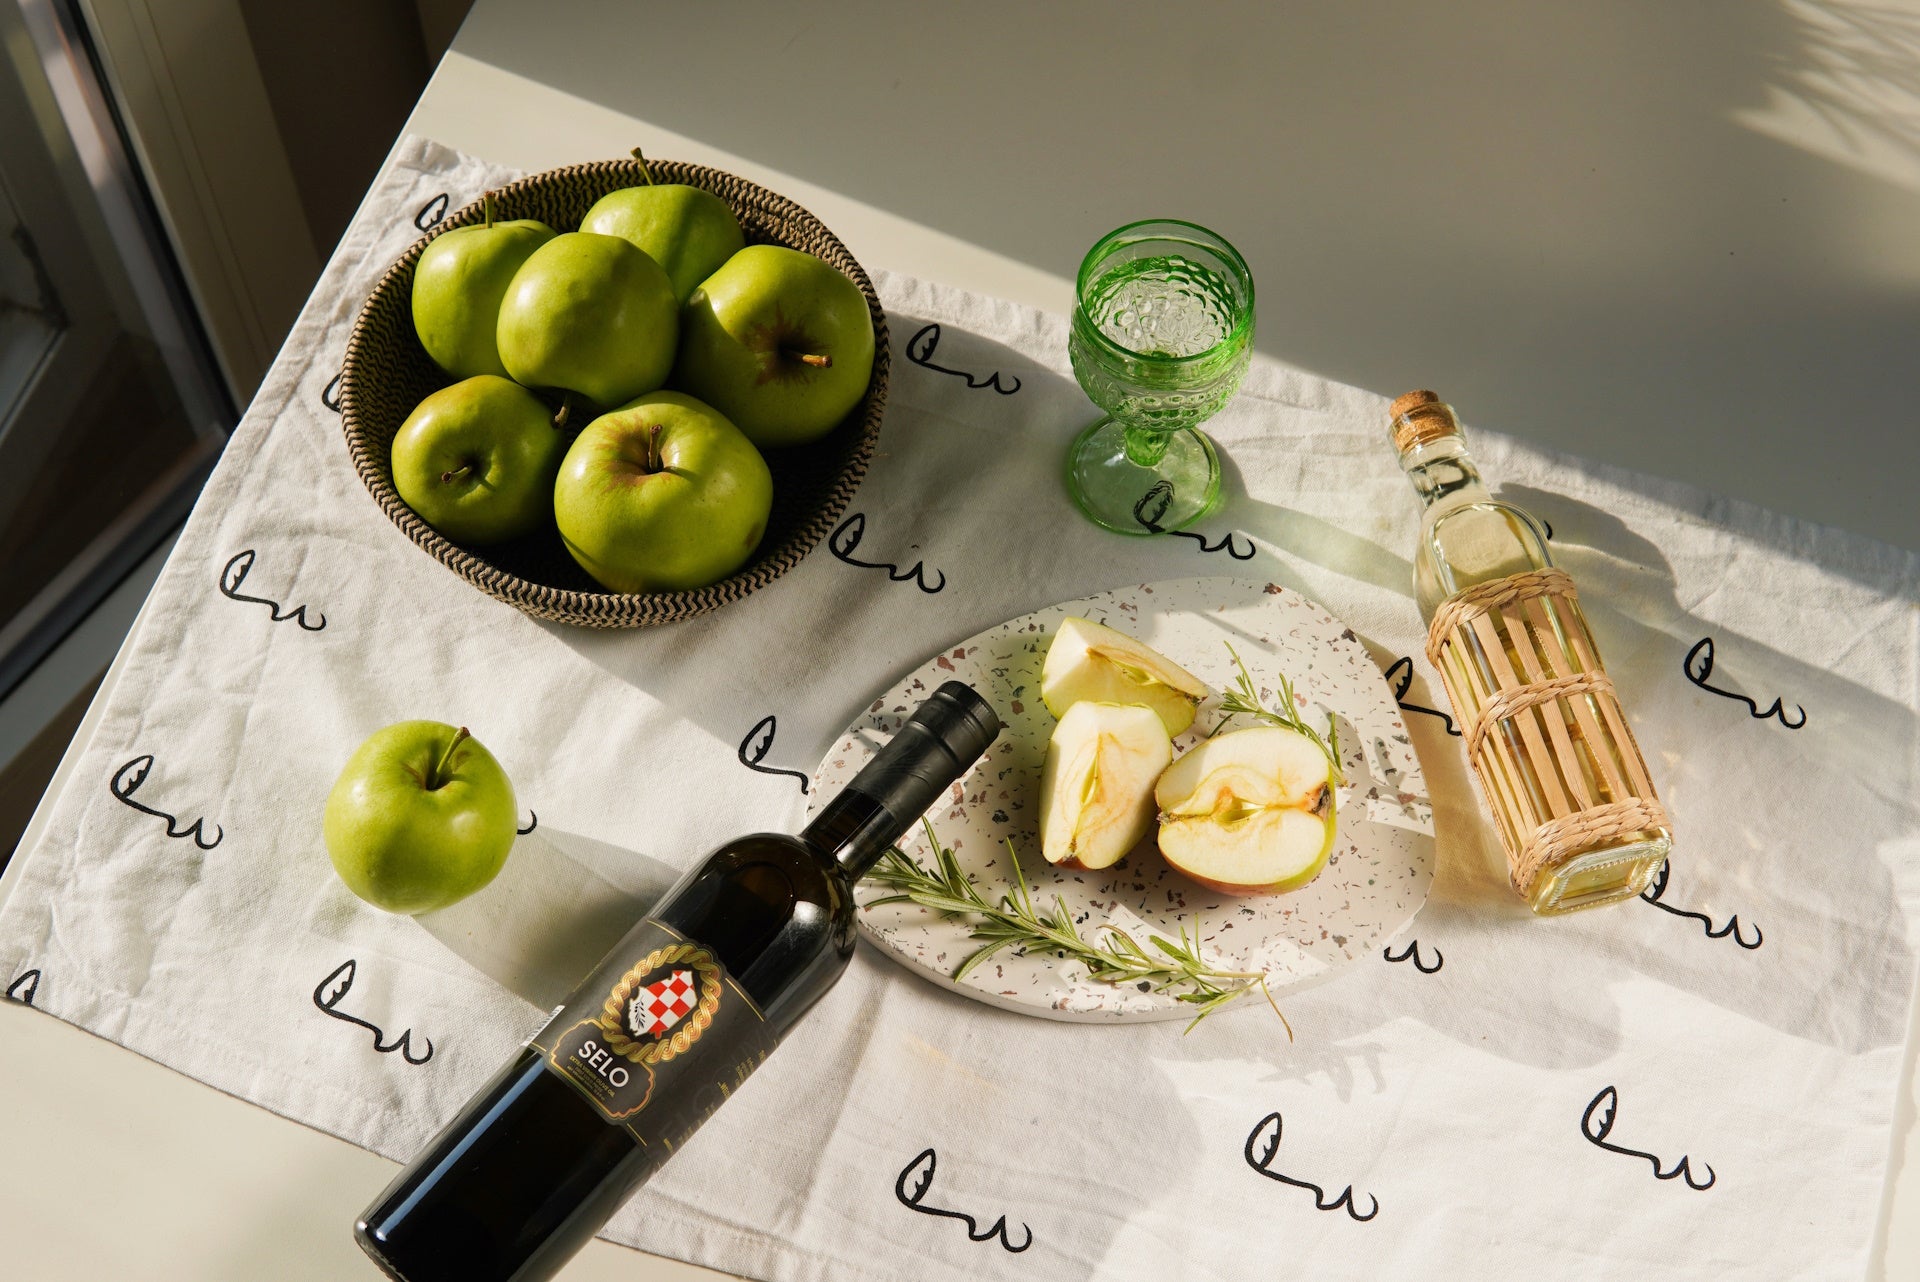 Fresh apples in a bowl alongside another filled with olives, accompanied by a bottle of Croatian olive oil.